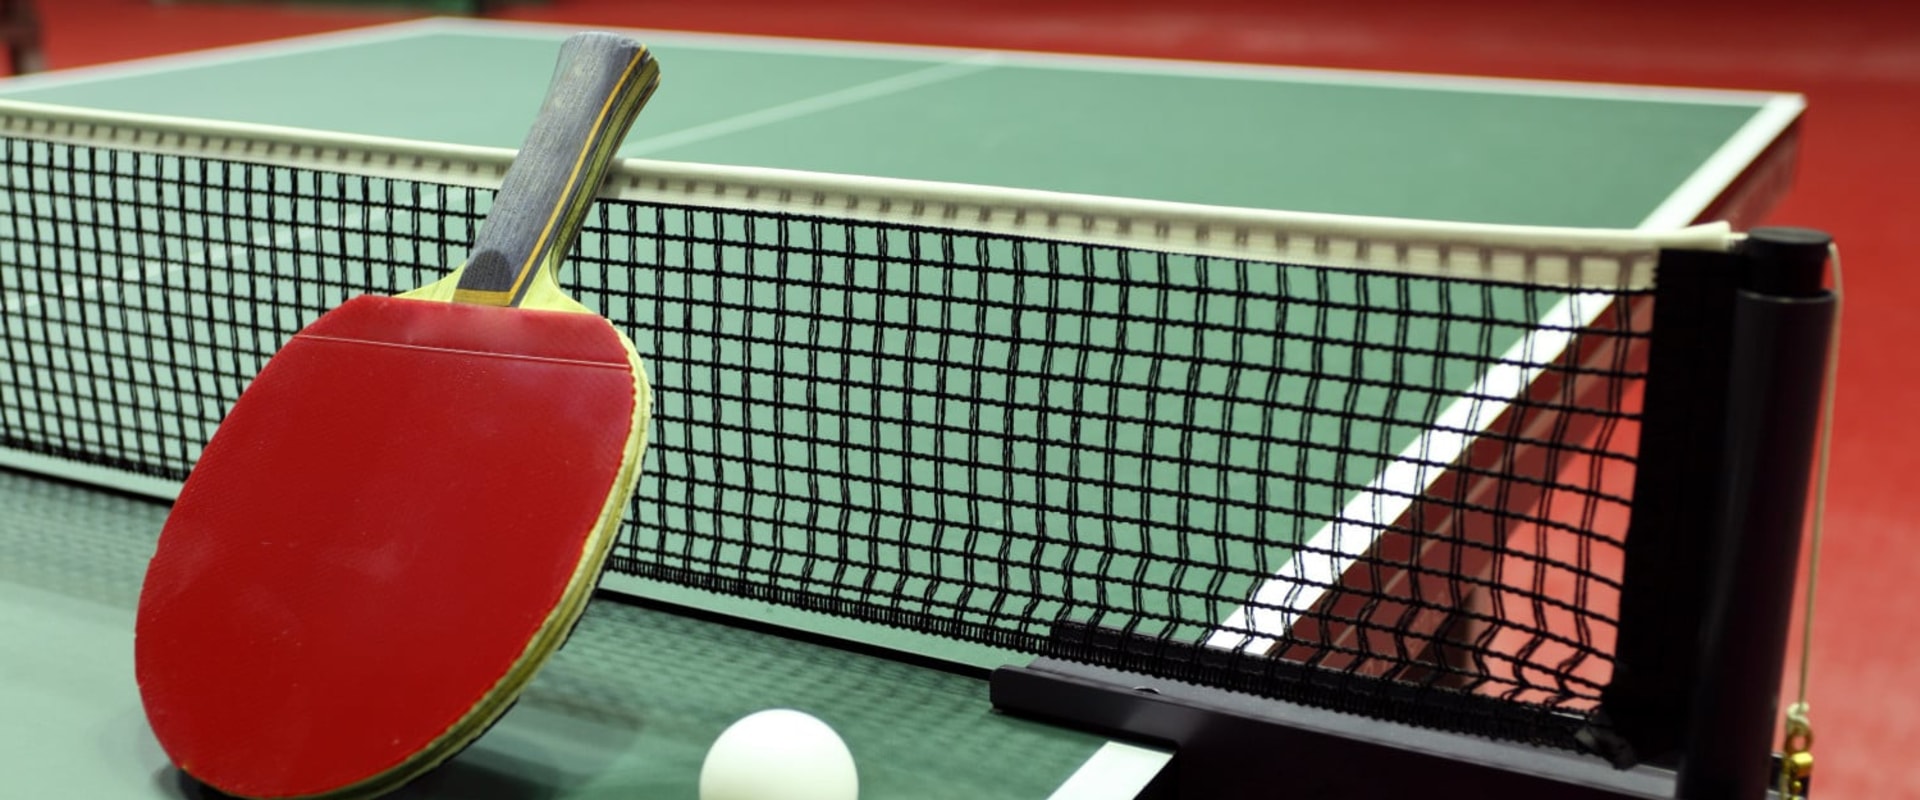 Does Equipment Matter in Table Tennis? An Expert's Perspective